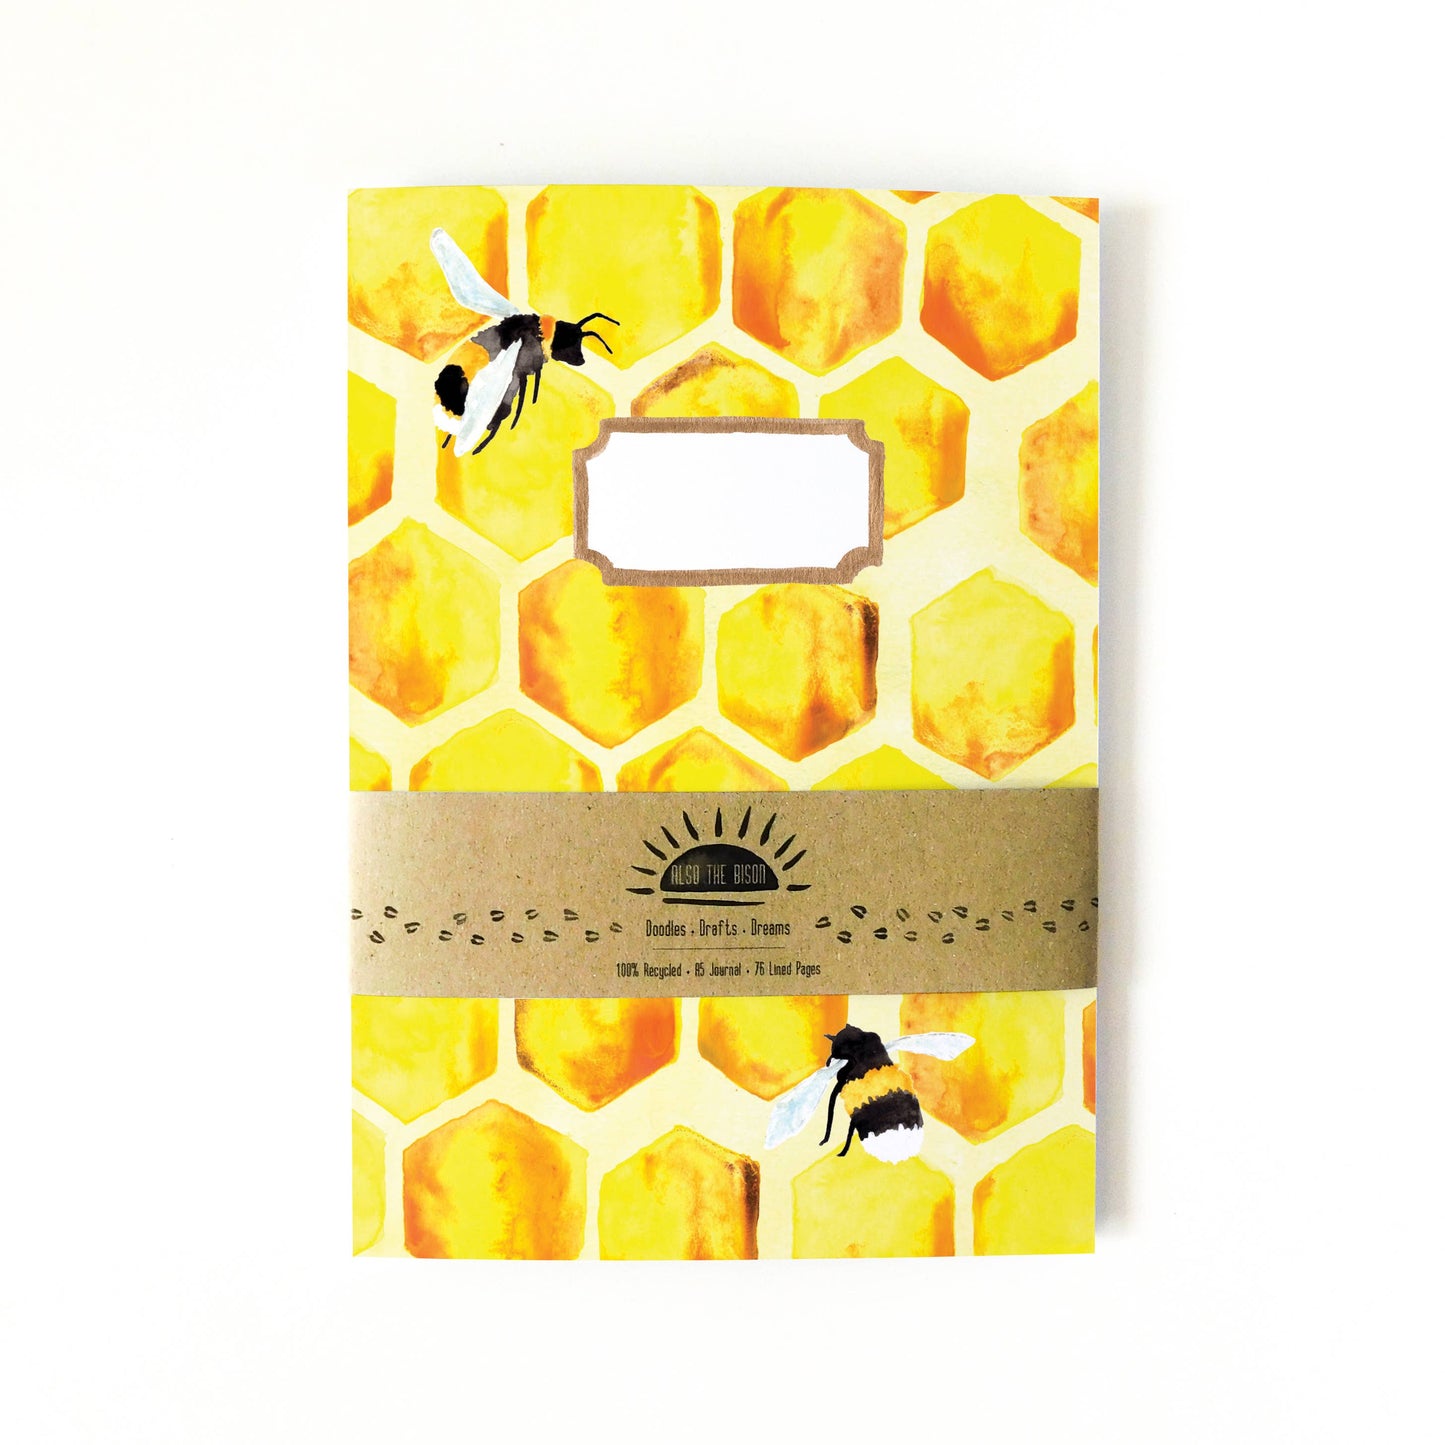 Mellifera Honeybee Lined Journal by Also the Bison